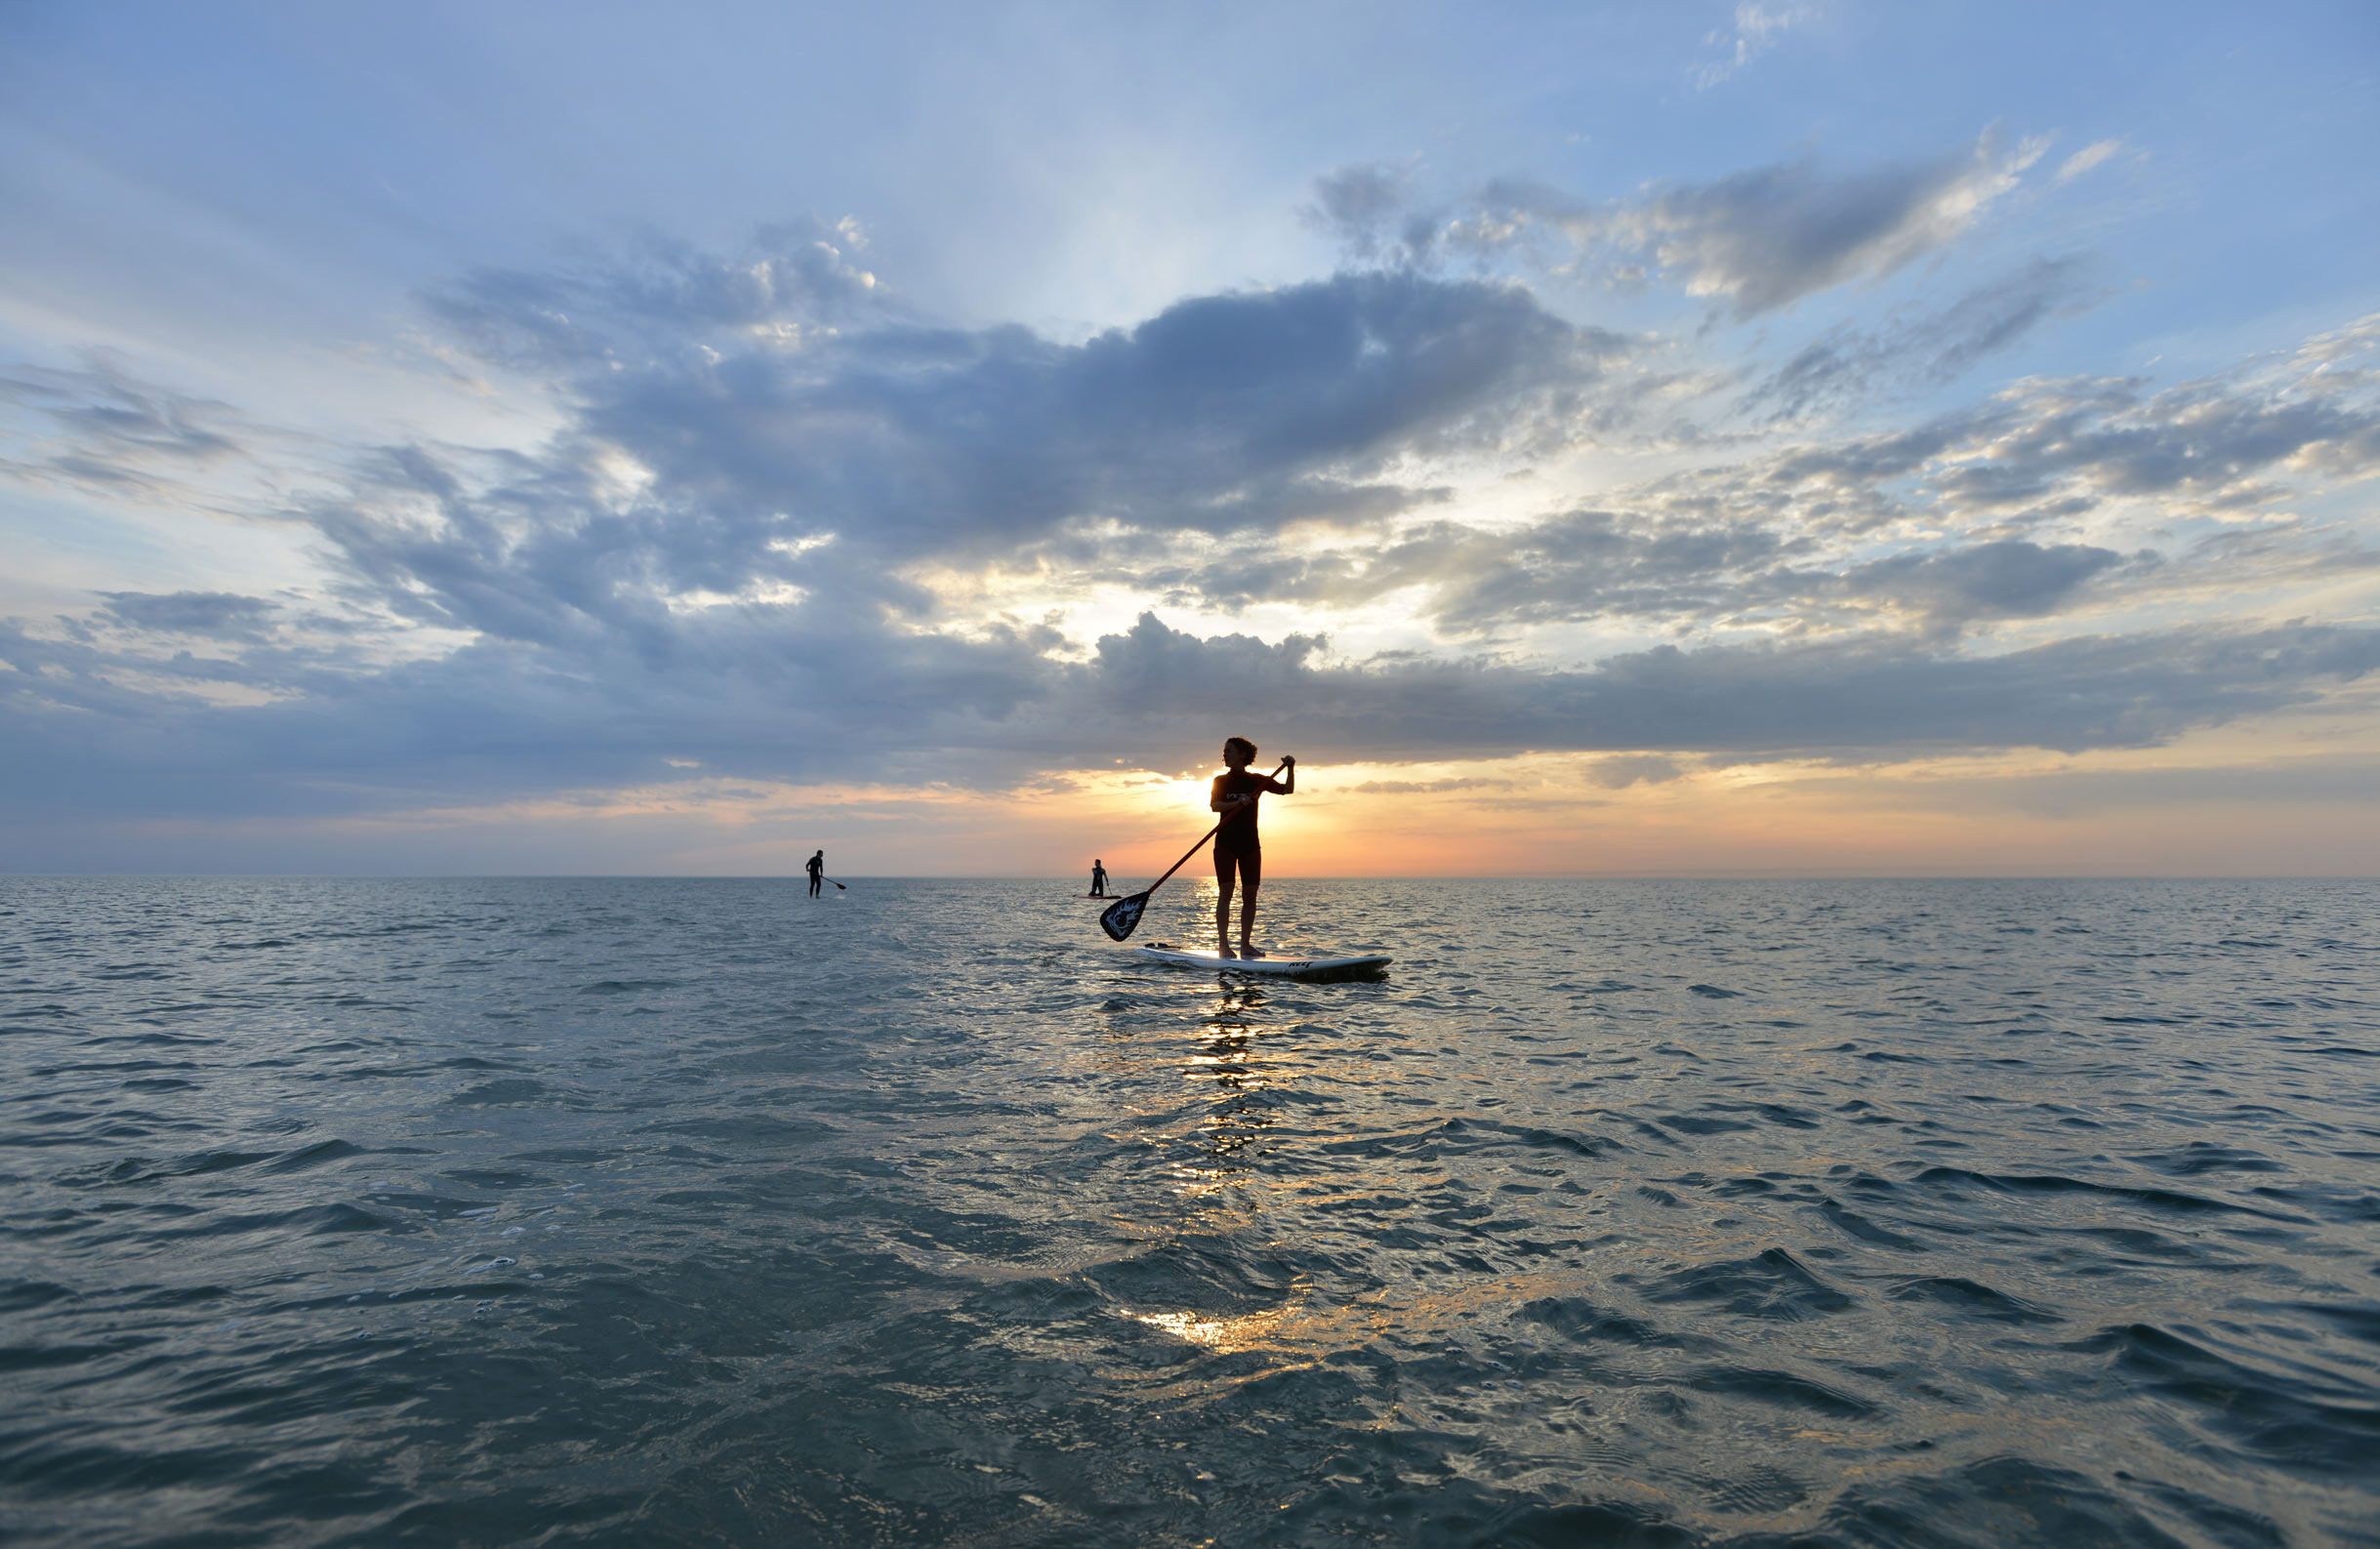 Relax and glide across the water at Cayeux-sur-Mer enjoying a spot of paddleboarding